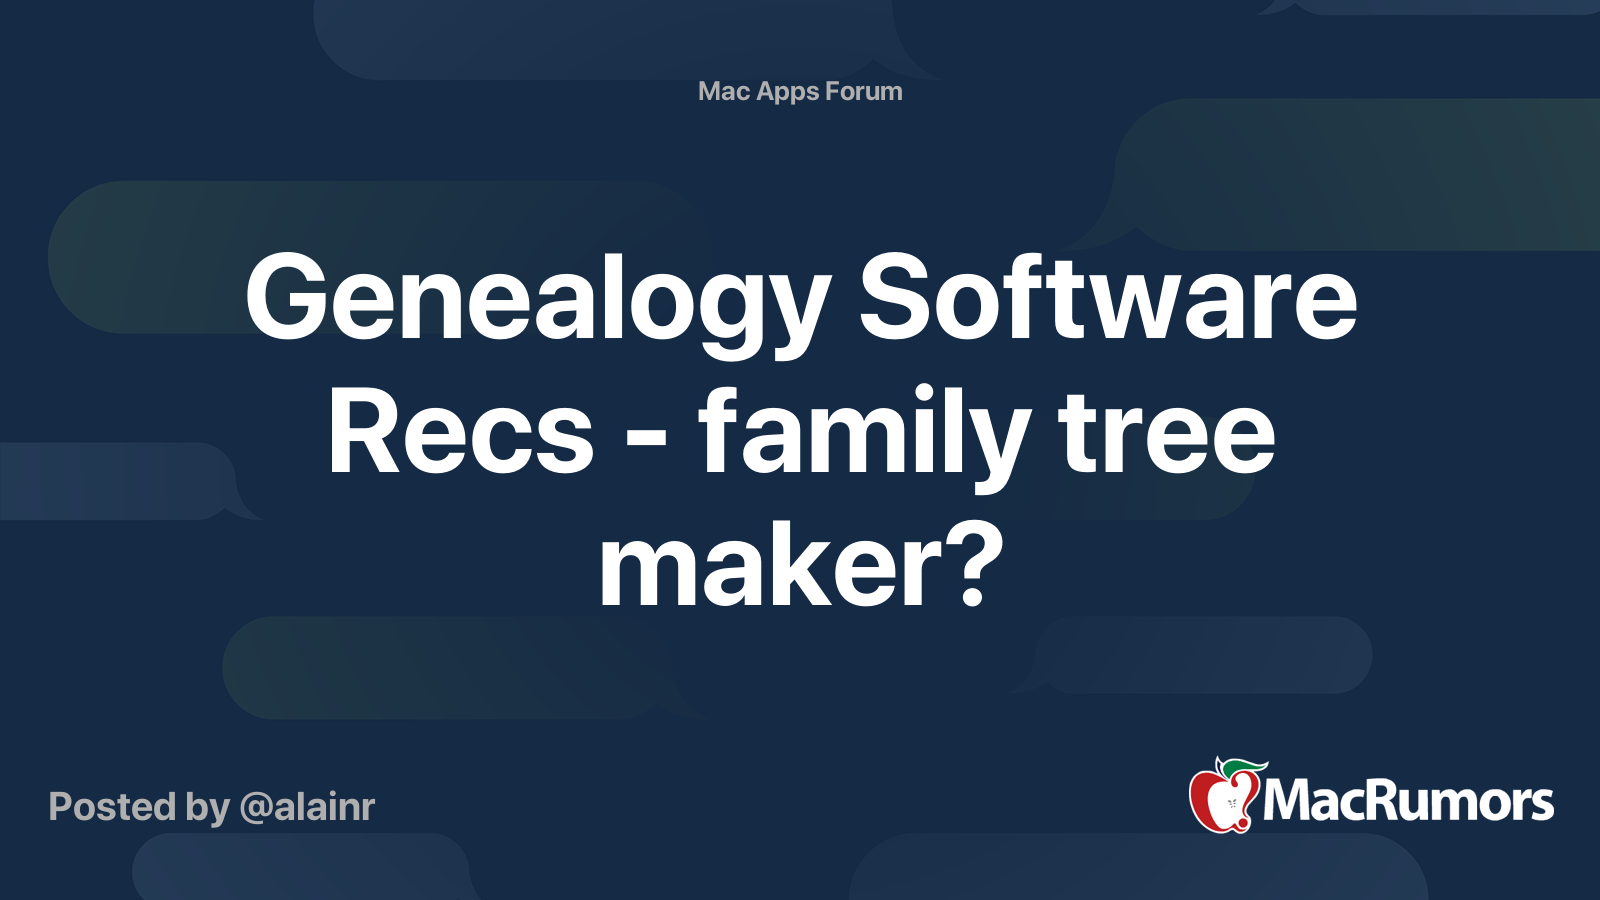 Genealogy software for mac users